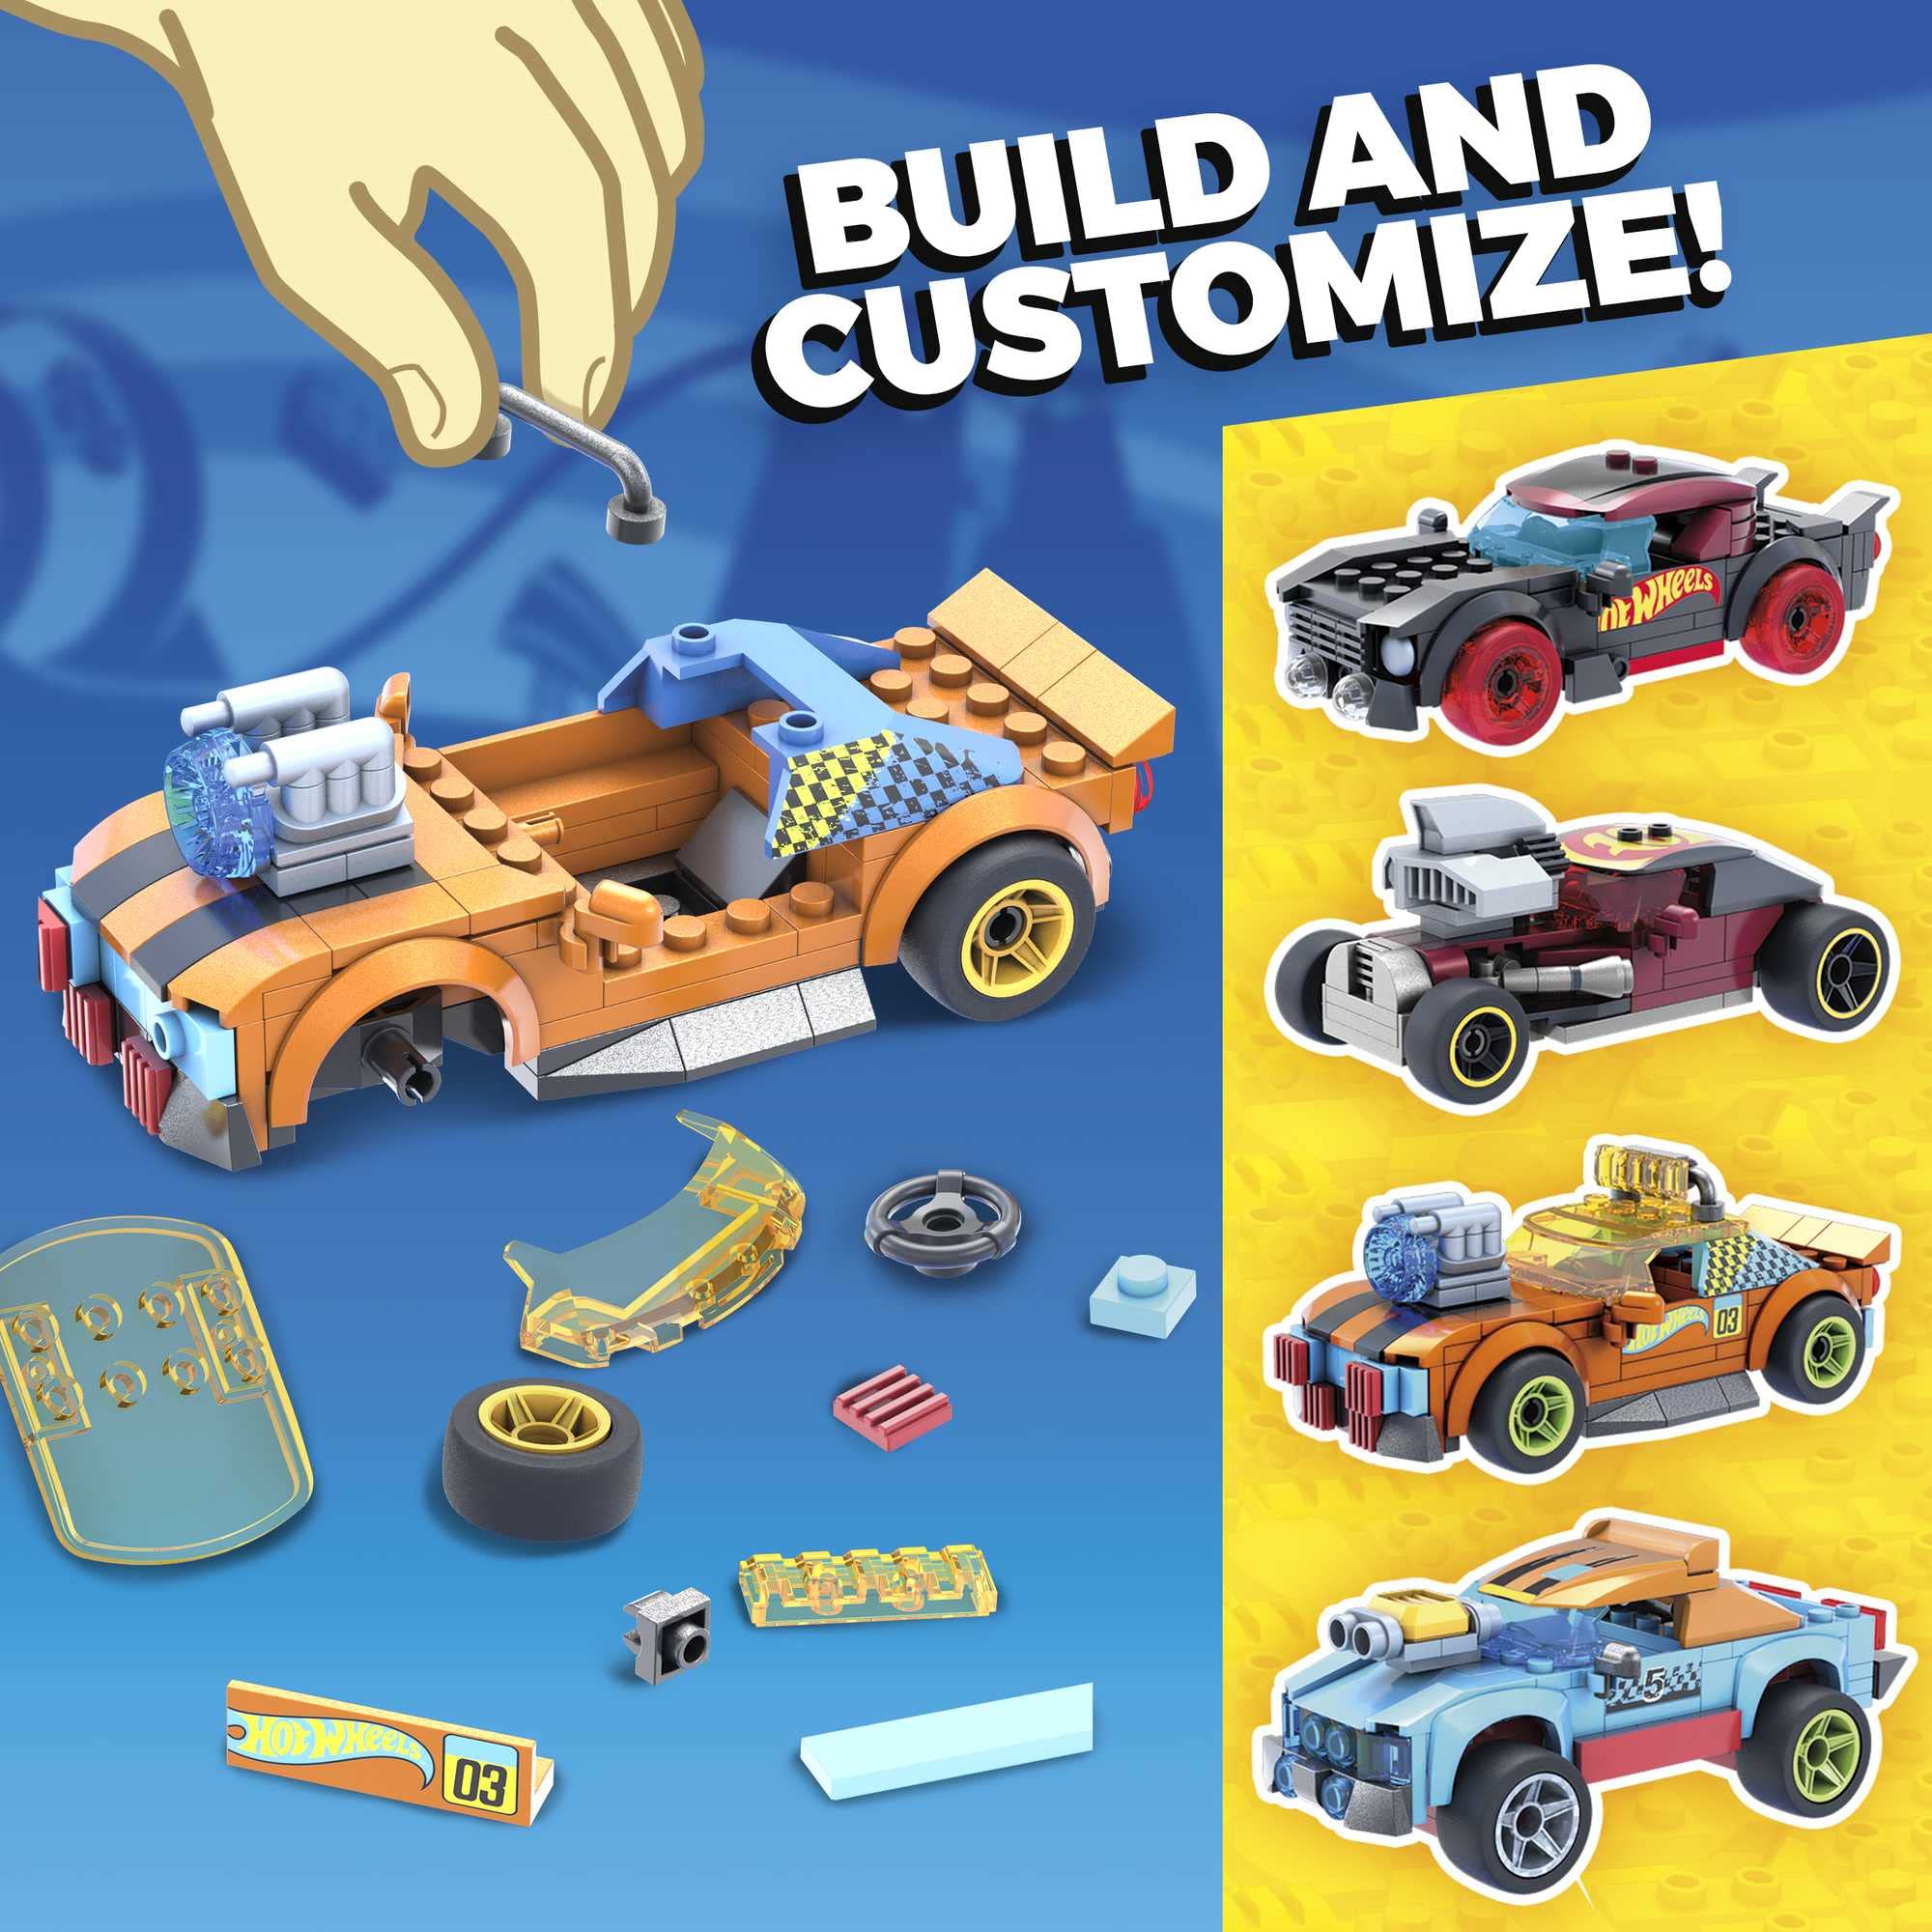 MEGA Hot Wheels Race Car Building Toys, Car Customizer Includes Rally Cat, Dawgzilla, Night Shifter, Mod Rod and 4 Micro Action Figure Drivers